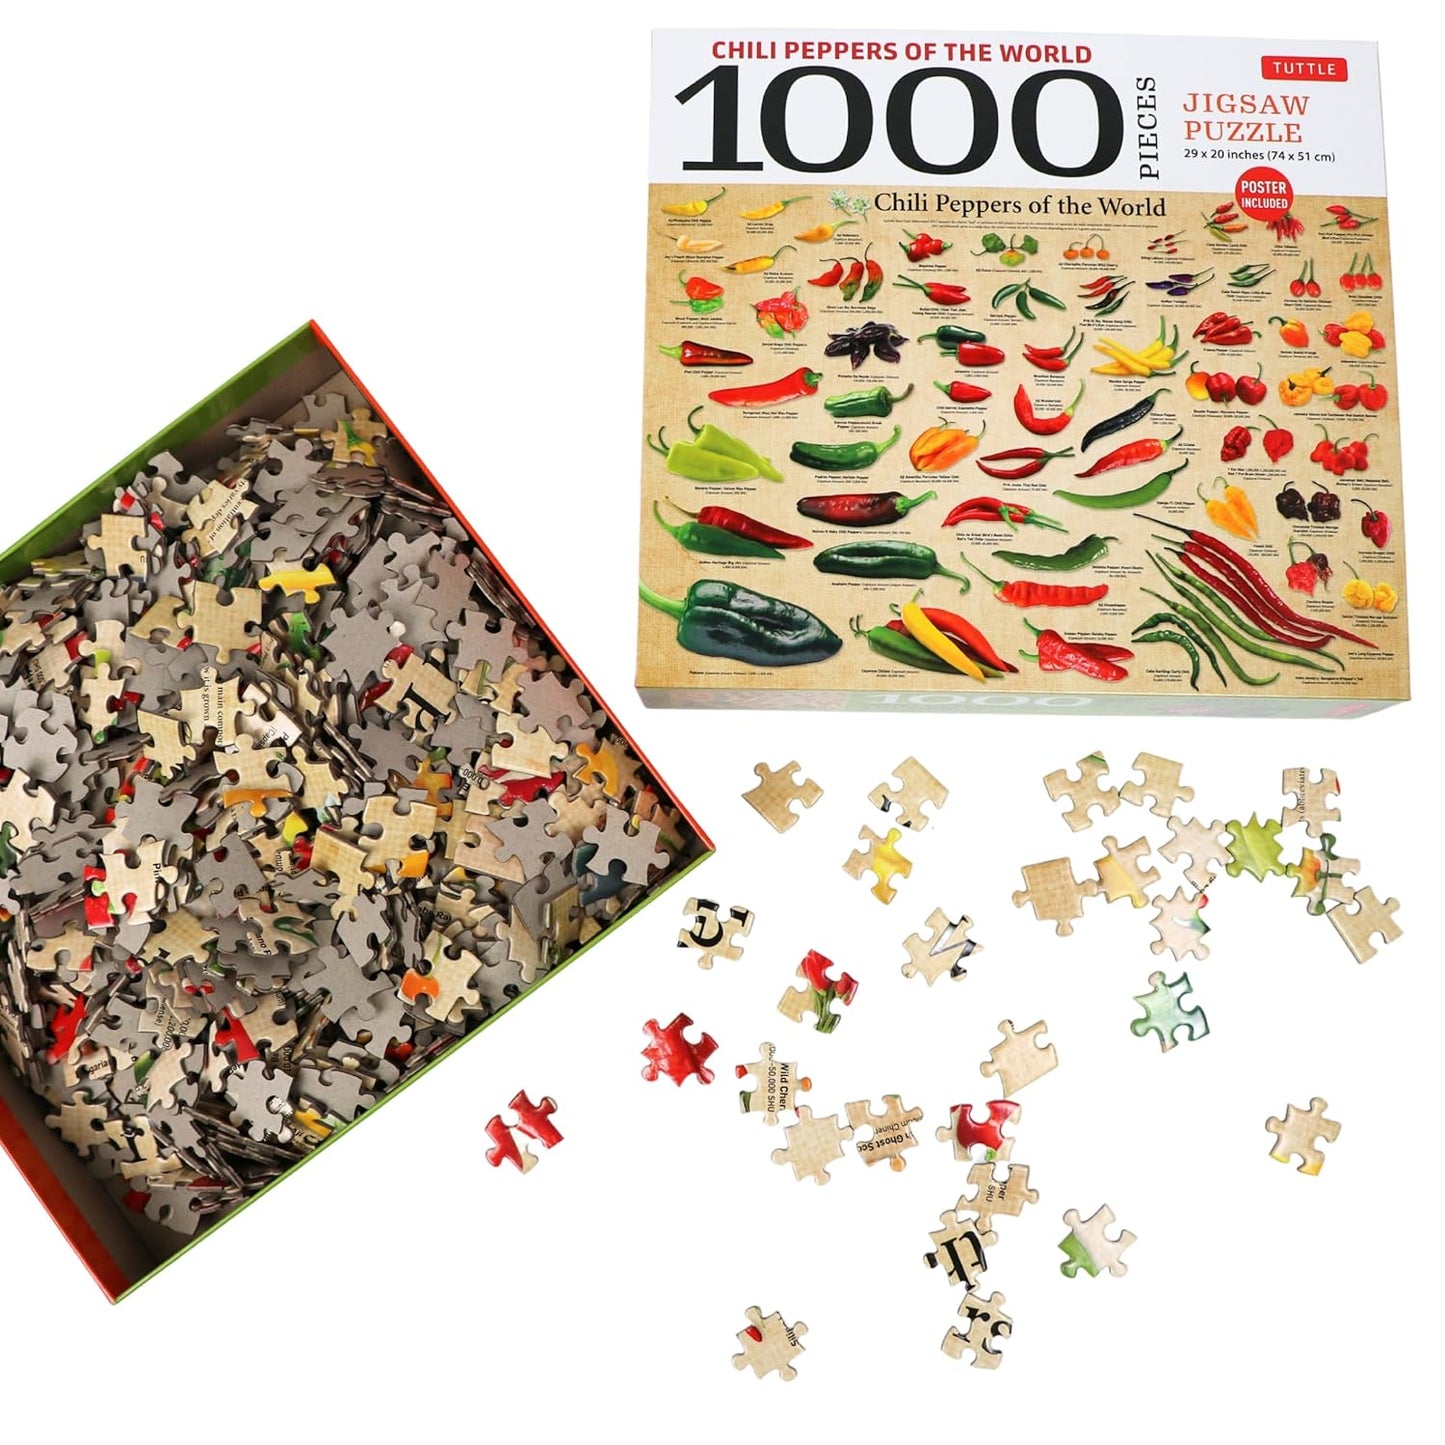 Chili Peppers of the World 1000 Piece Puzzle